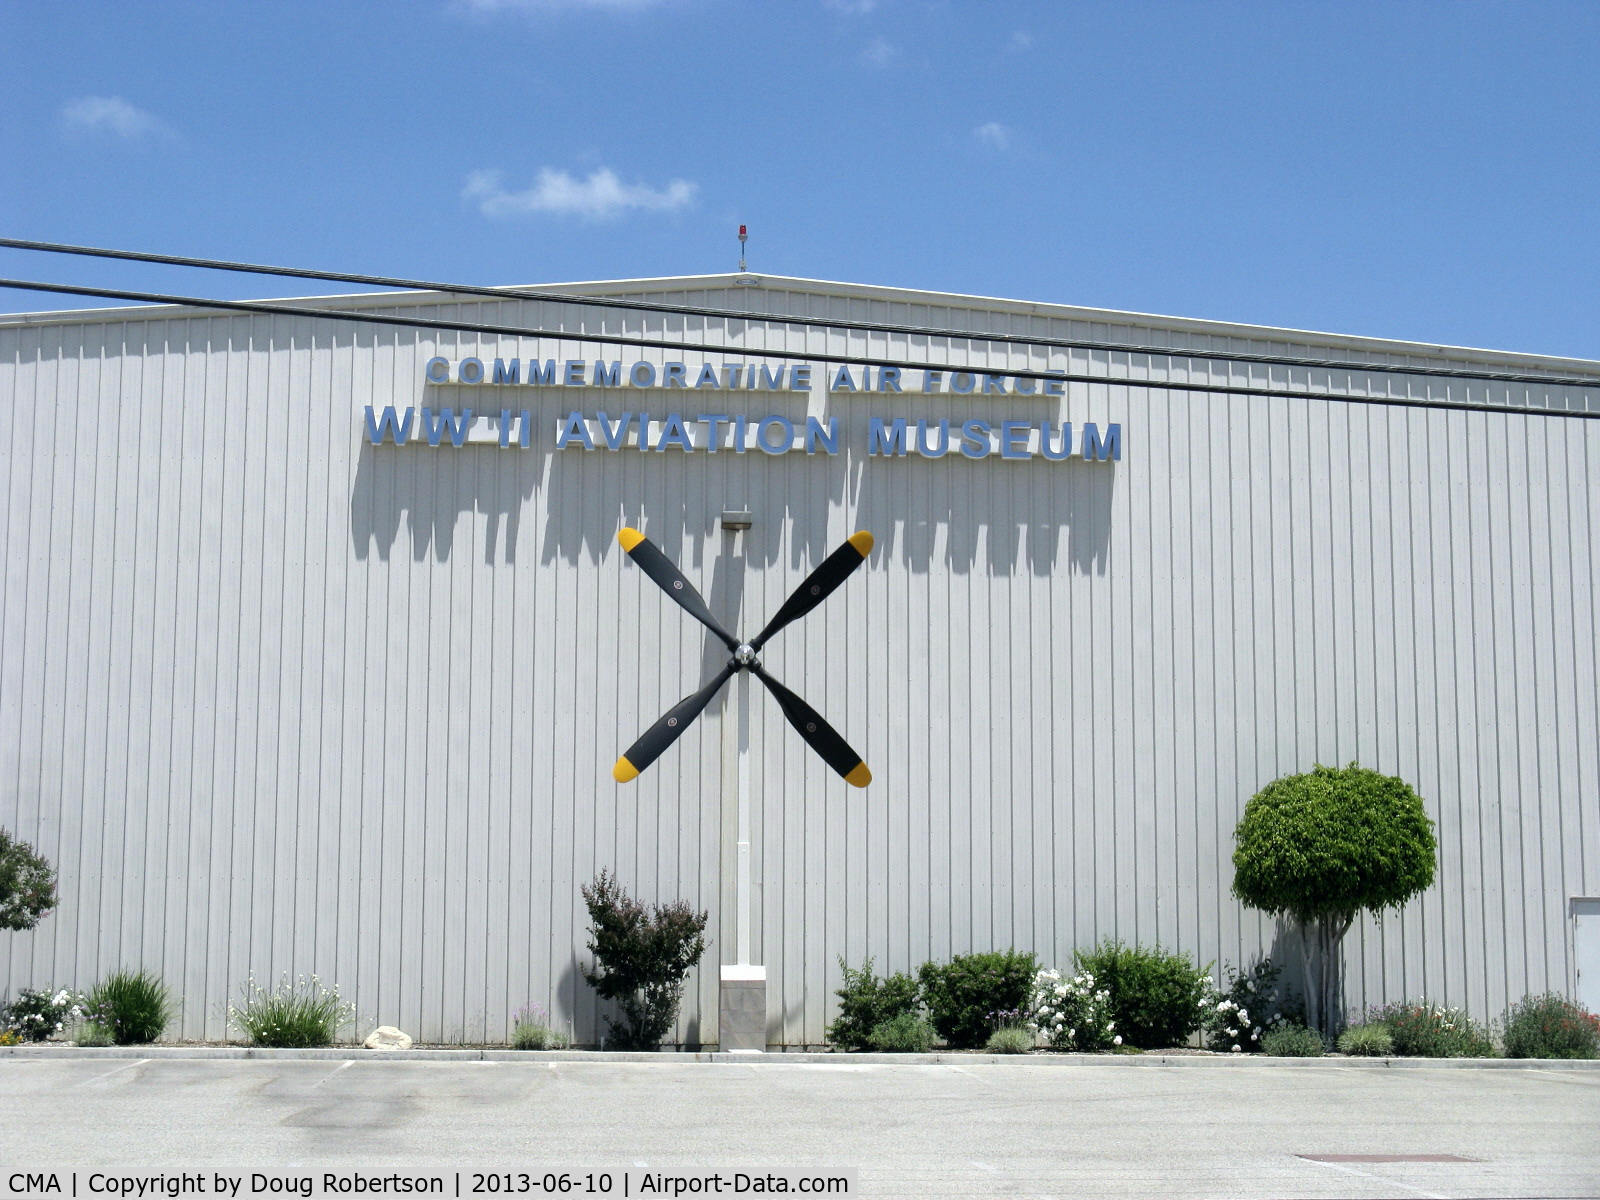 Camarillo Airport (CMA) - Commemorative Air Force-Southern California Wing-Hangar One with added four-blade prop. Impressive! I was told this huge prop came from a Lockheed C-130 Hercules.